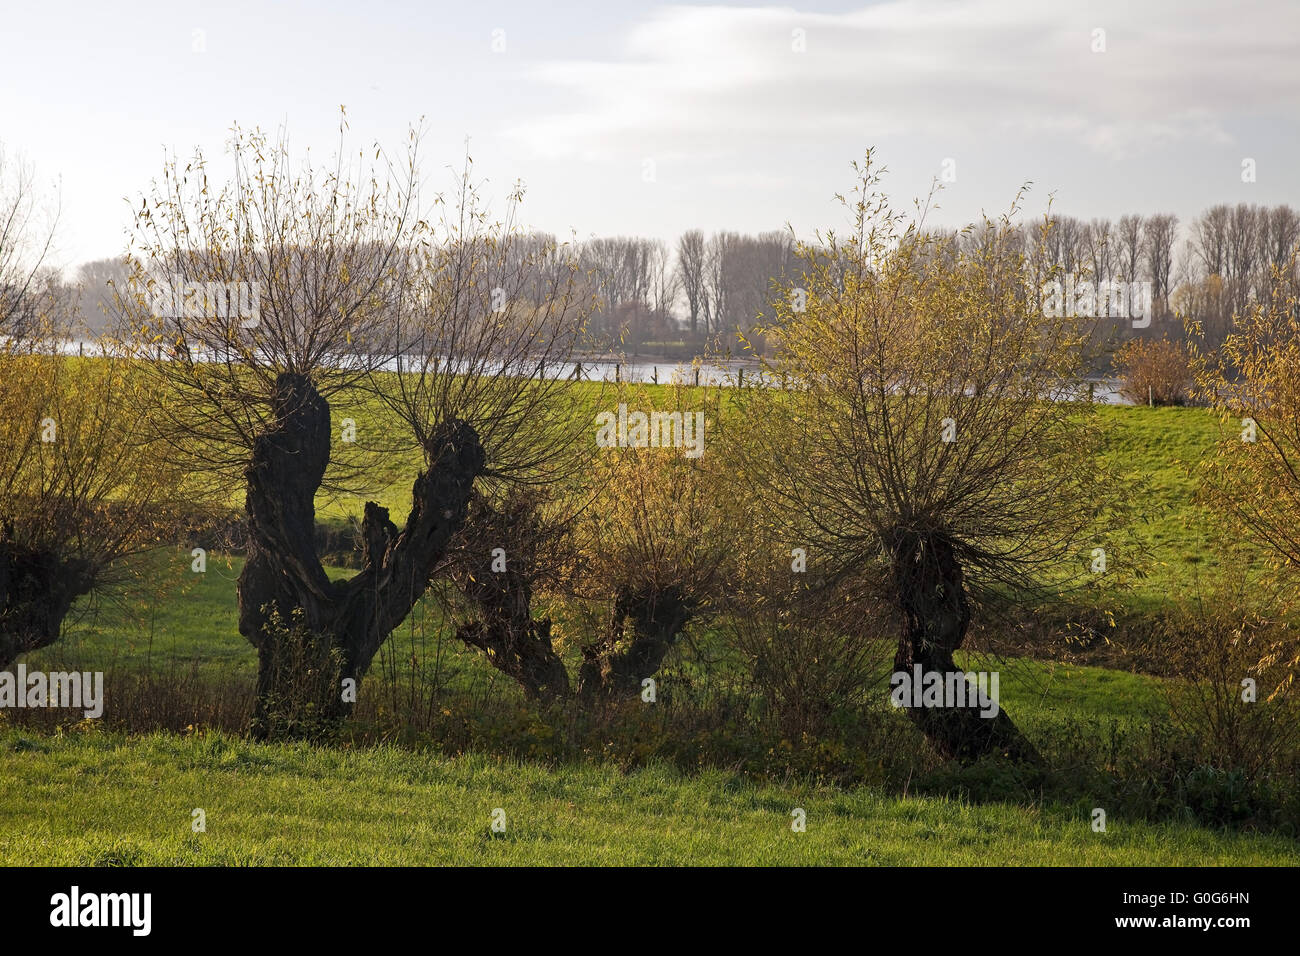 Lower Rhine landscape with pollarded willows and the river Rhine, Duesseldorf, Germany, Europe Stock Photo